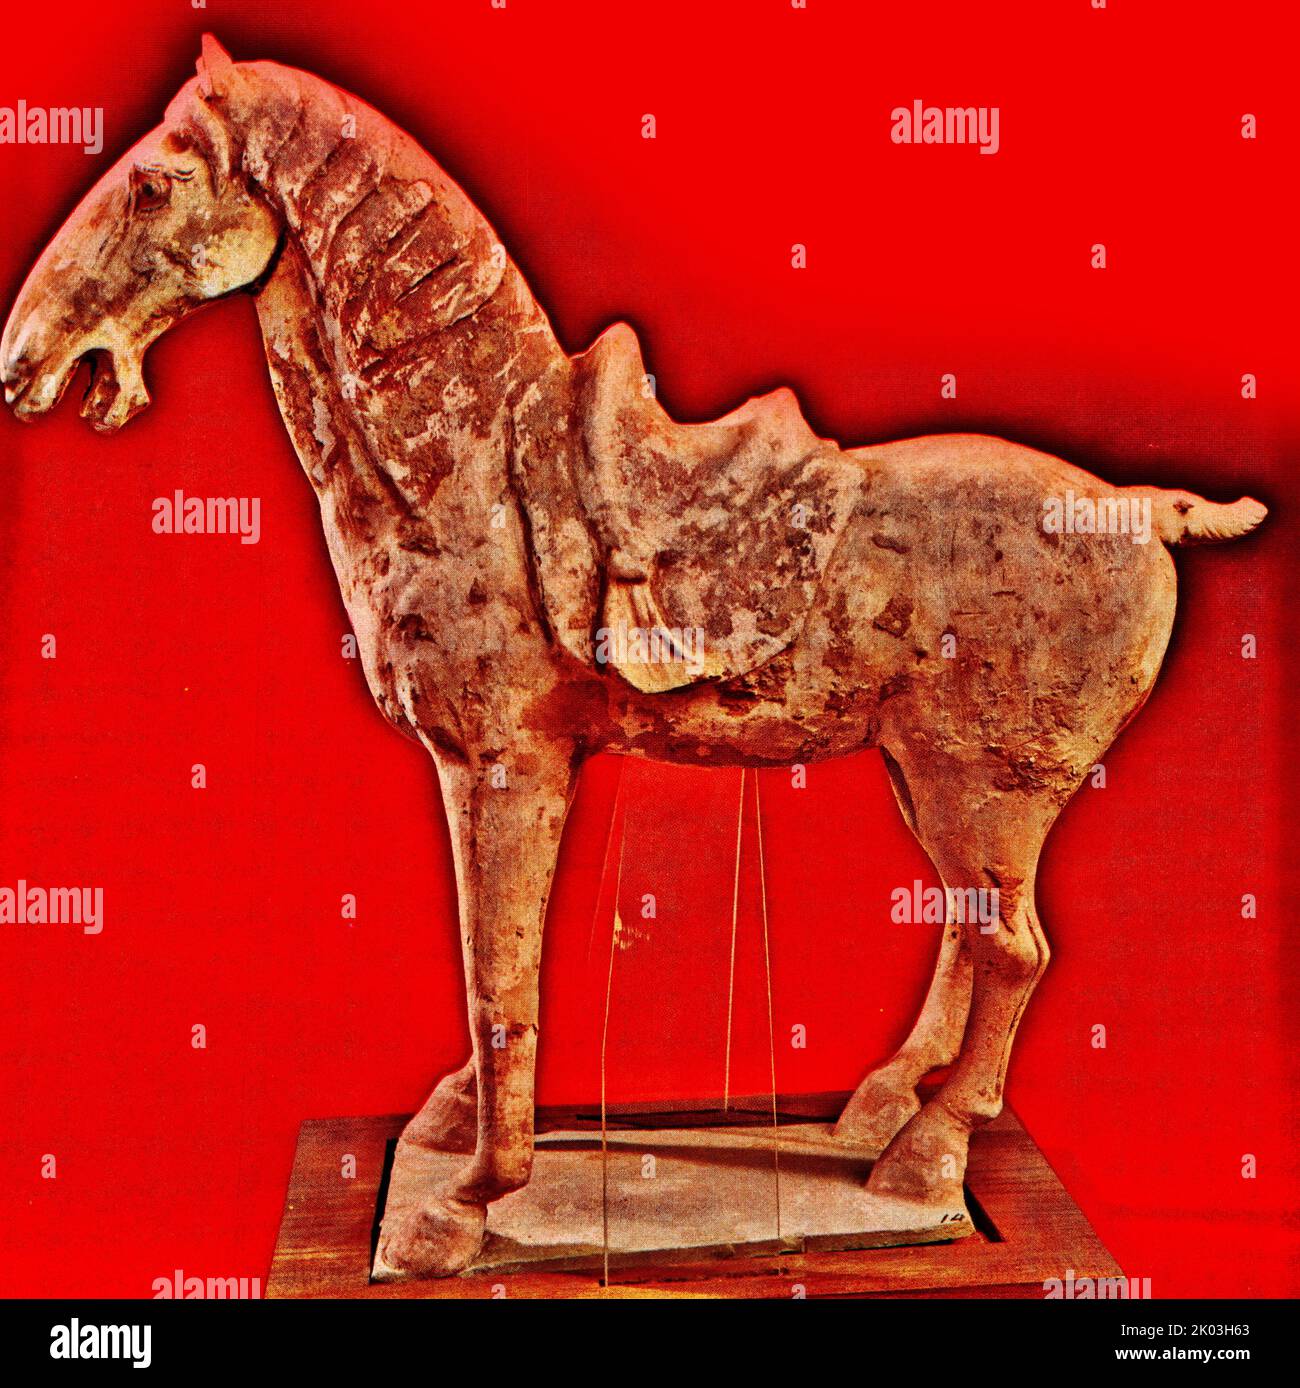 Tang Dynasty figurine of a horse. glazed white with traces of vermilion and ink painting. It stands upright on a rectangular platform. The horse is strong and has short legs and a large head in proportion. The head is straight, the eyes are open, the eyes are looking forward, the mouth is open and hissing, the sideburns are drooping to the left, the tail is upturned, and the limbs are stable. The eyes are drawn with vermilion and ink, and the lines of the muscles on the horse's face are very realistic. Stock Photo